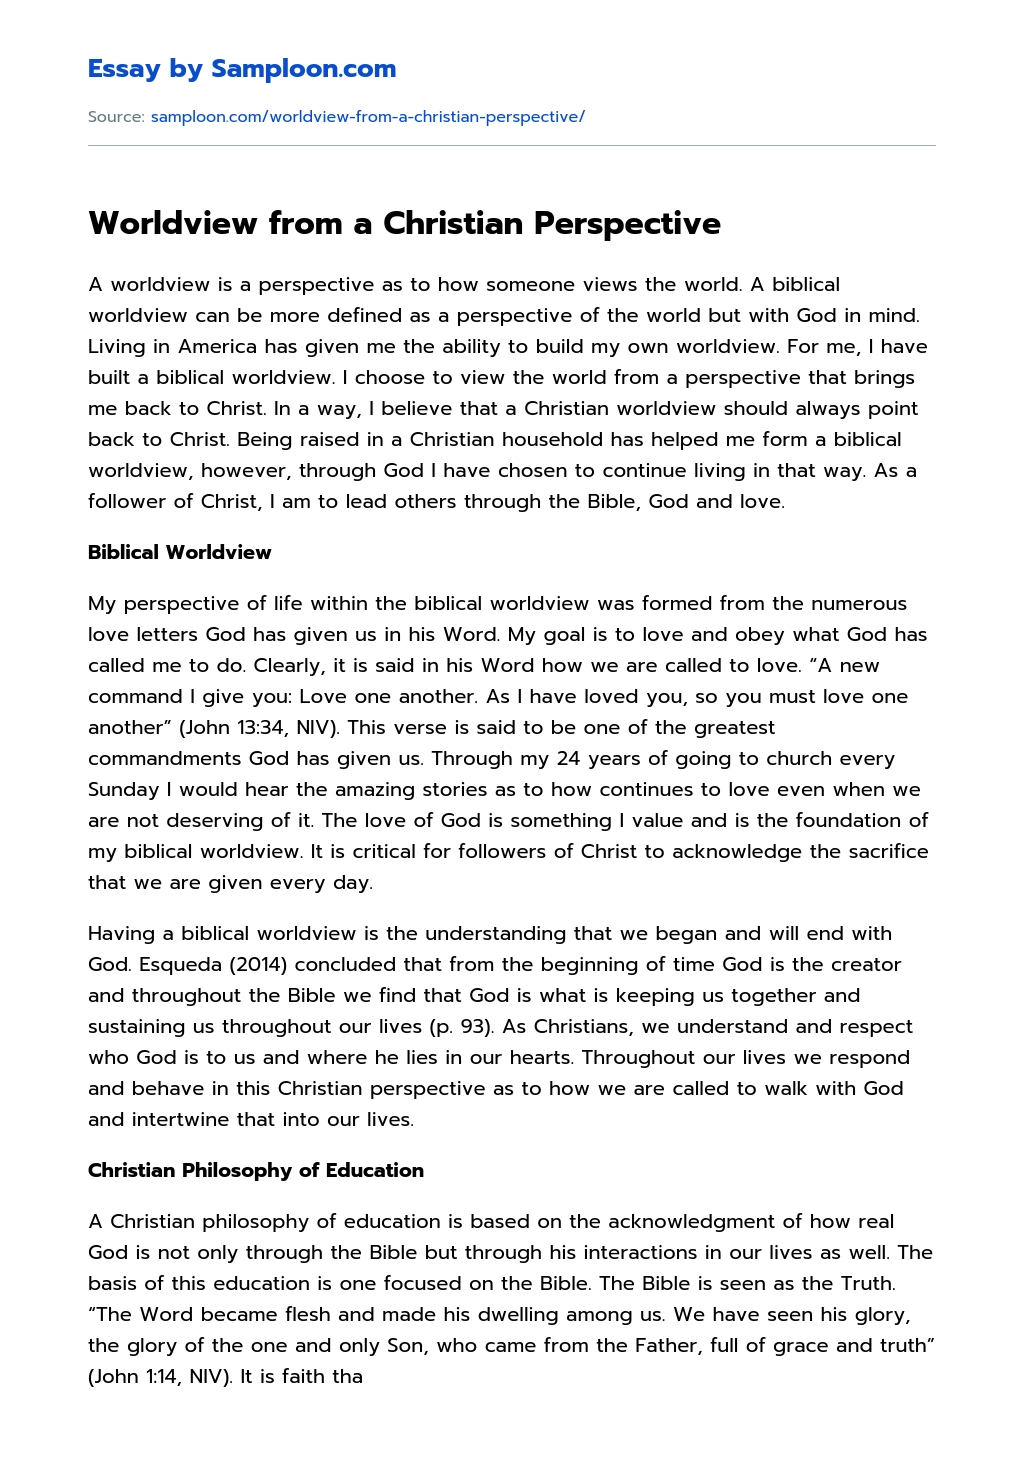 Worldview from a Christian Perspective essay